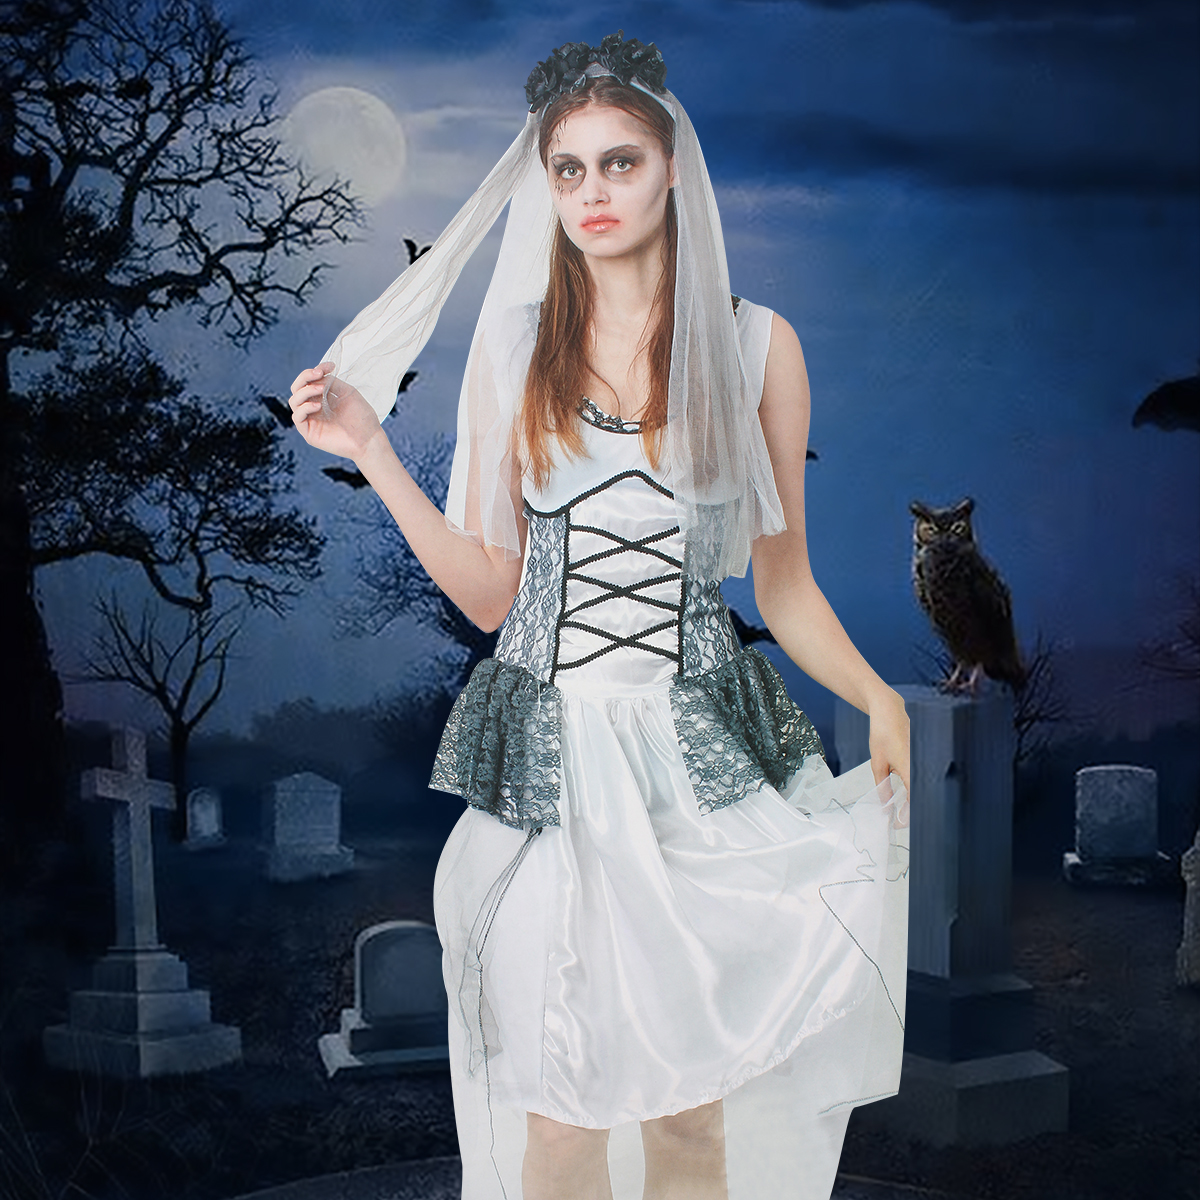 Dress Up Scary Girls Dresses Halloween Ghost Bride Costume